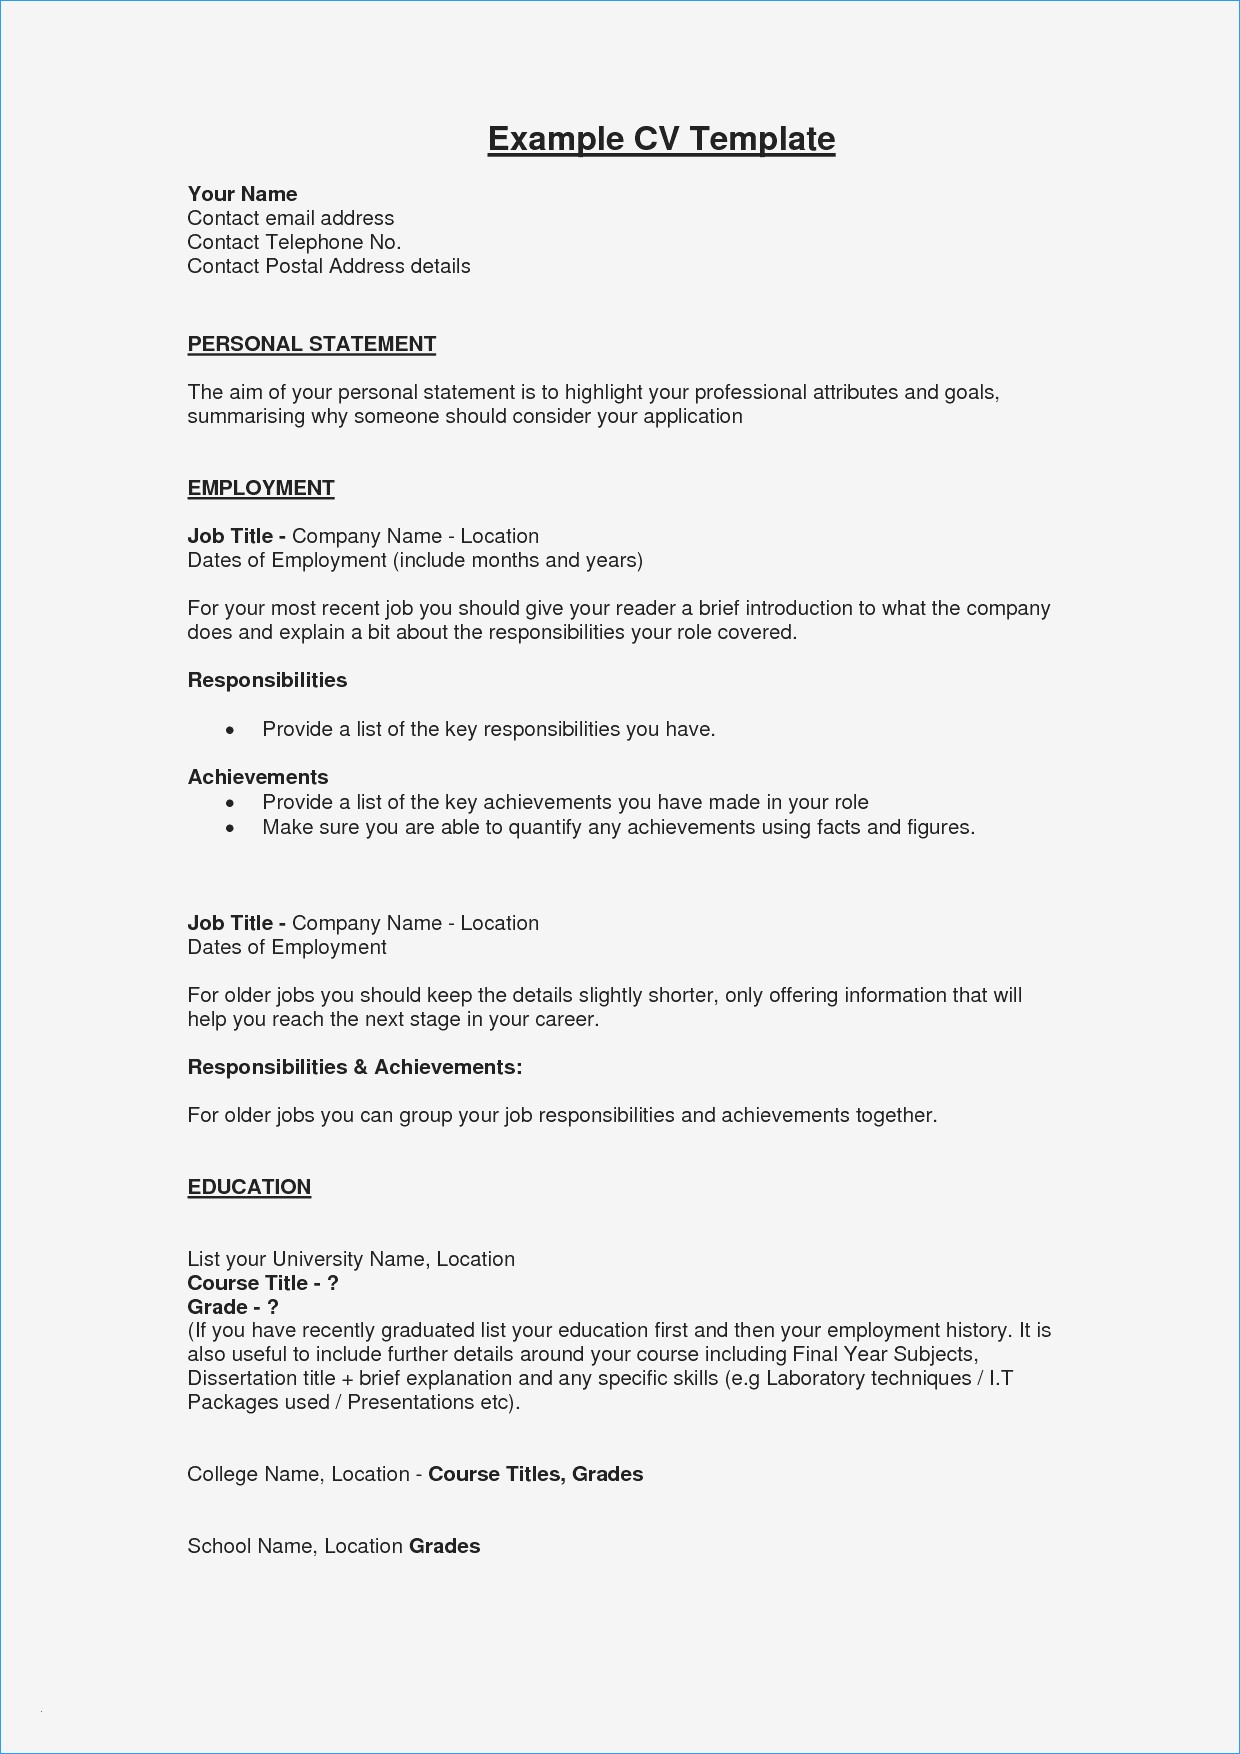 How Long Should A Resume Be What Should Be On A Resume New Make Your Resume Beautiful Make A Cv For Job Elegant New Examples Of What Should Be On A Resume how long should a resume be|wikiresume.com